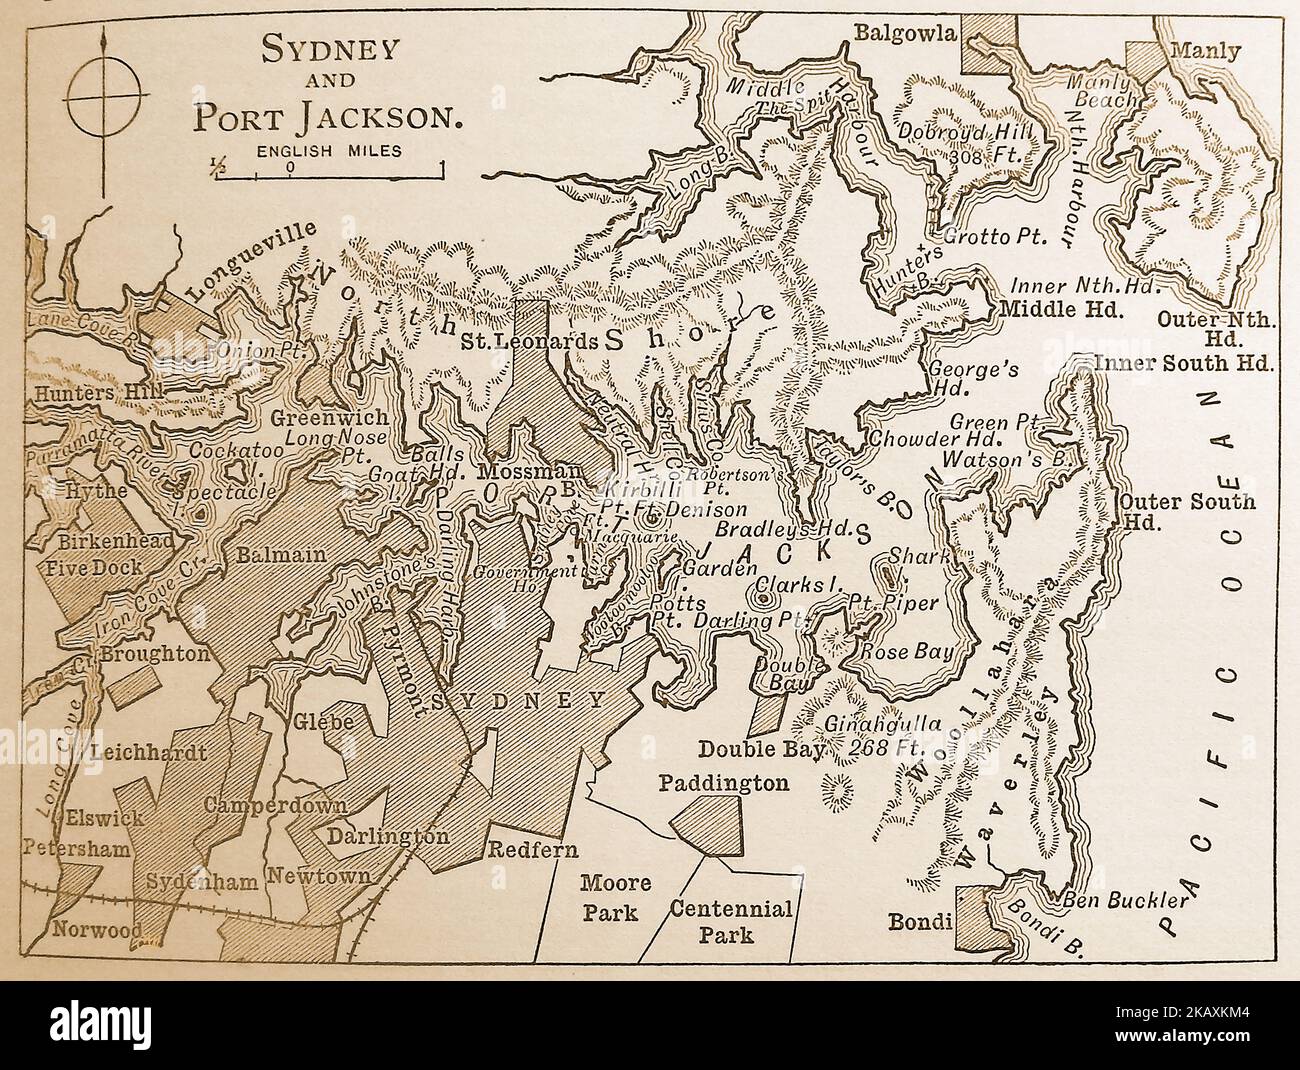 A late 19thcentury map of Sydney and Port Jackson regions Stock Photo